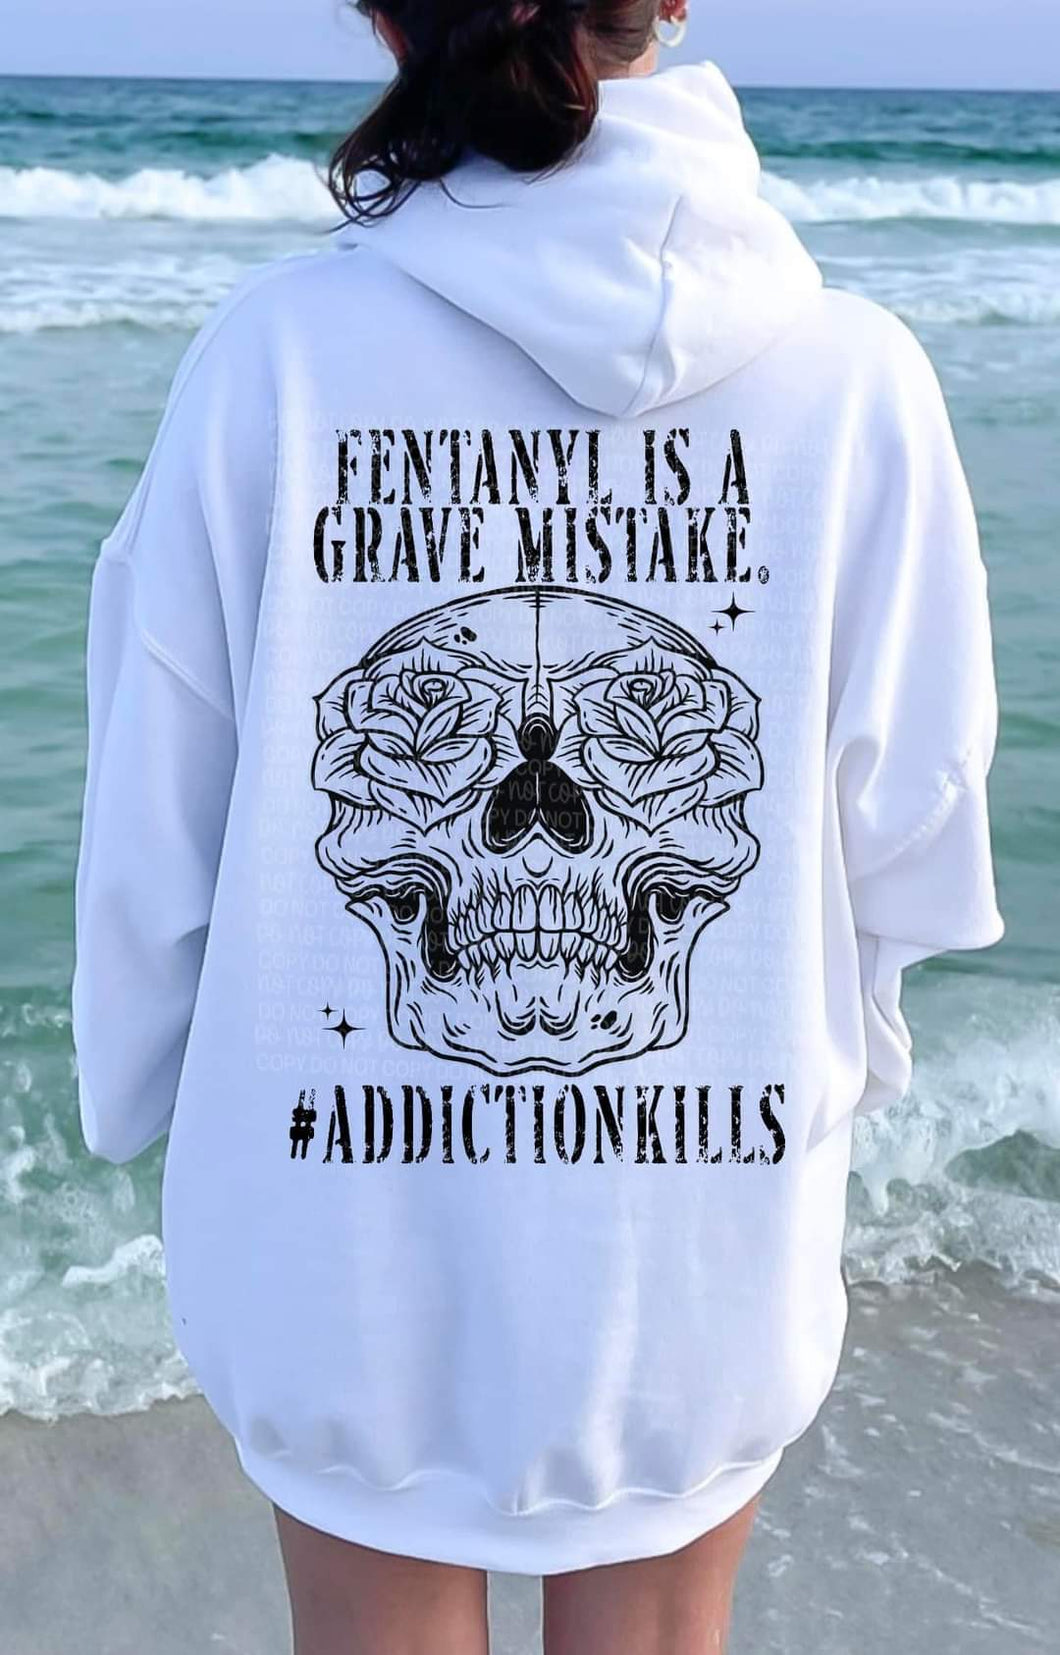 Fentanyl is a grave mistake